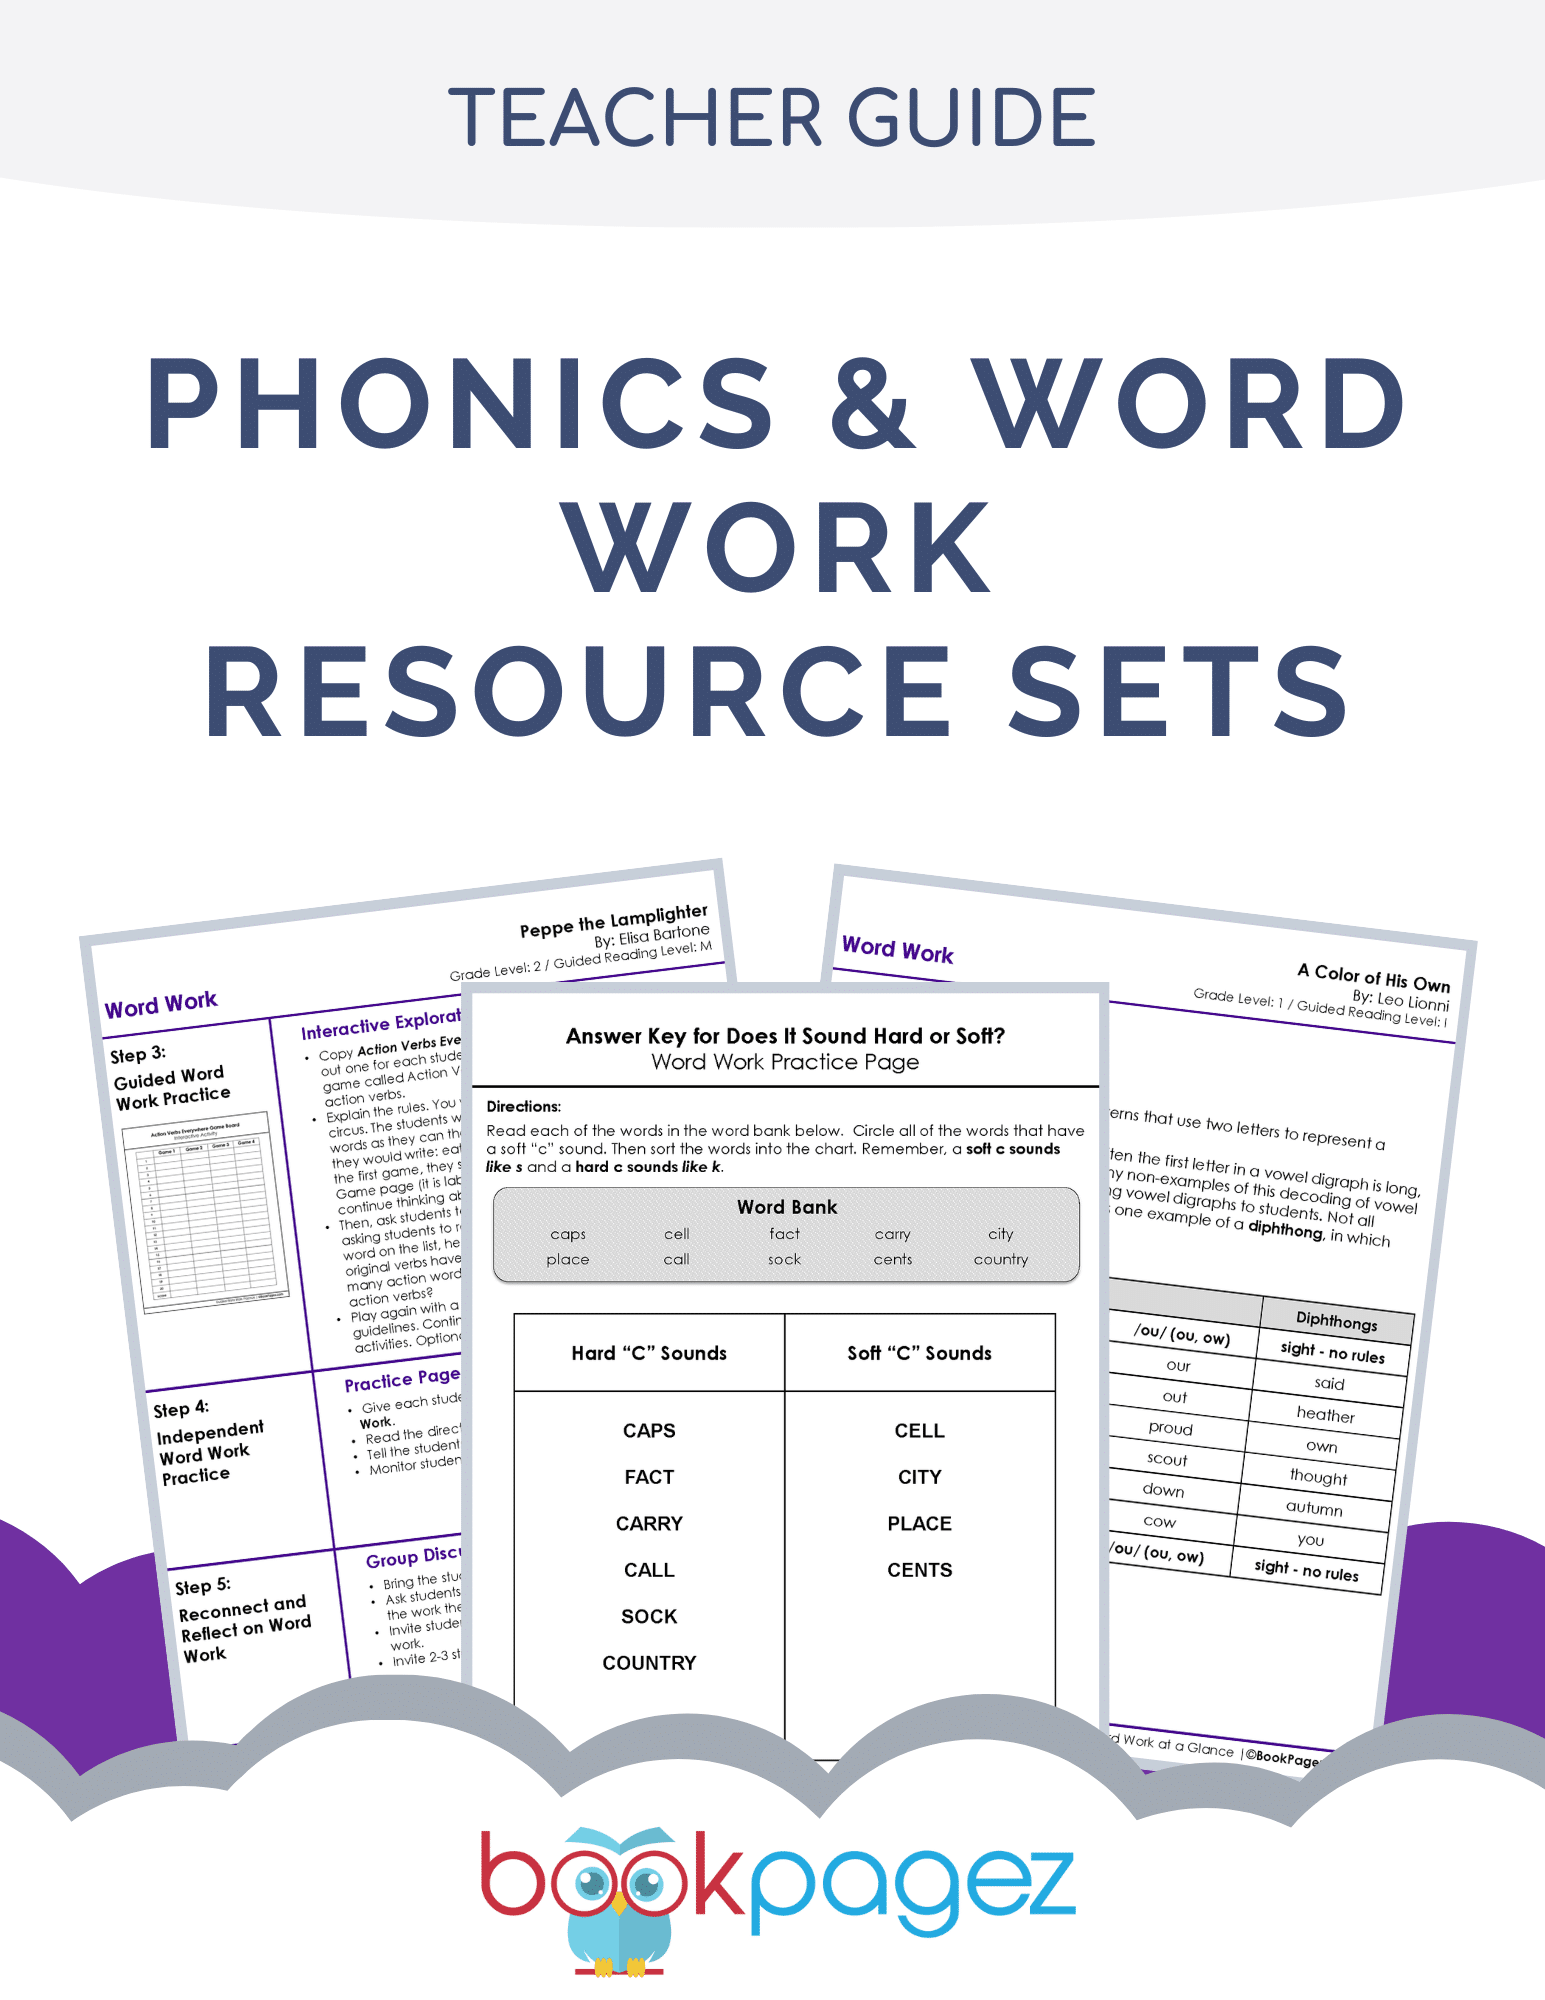 Cover for the Phonics and Word Study Resources Teacher Guide